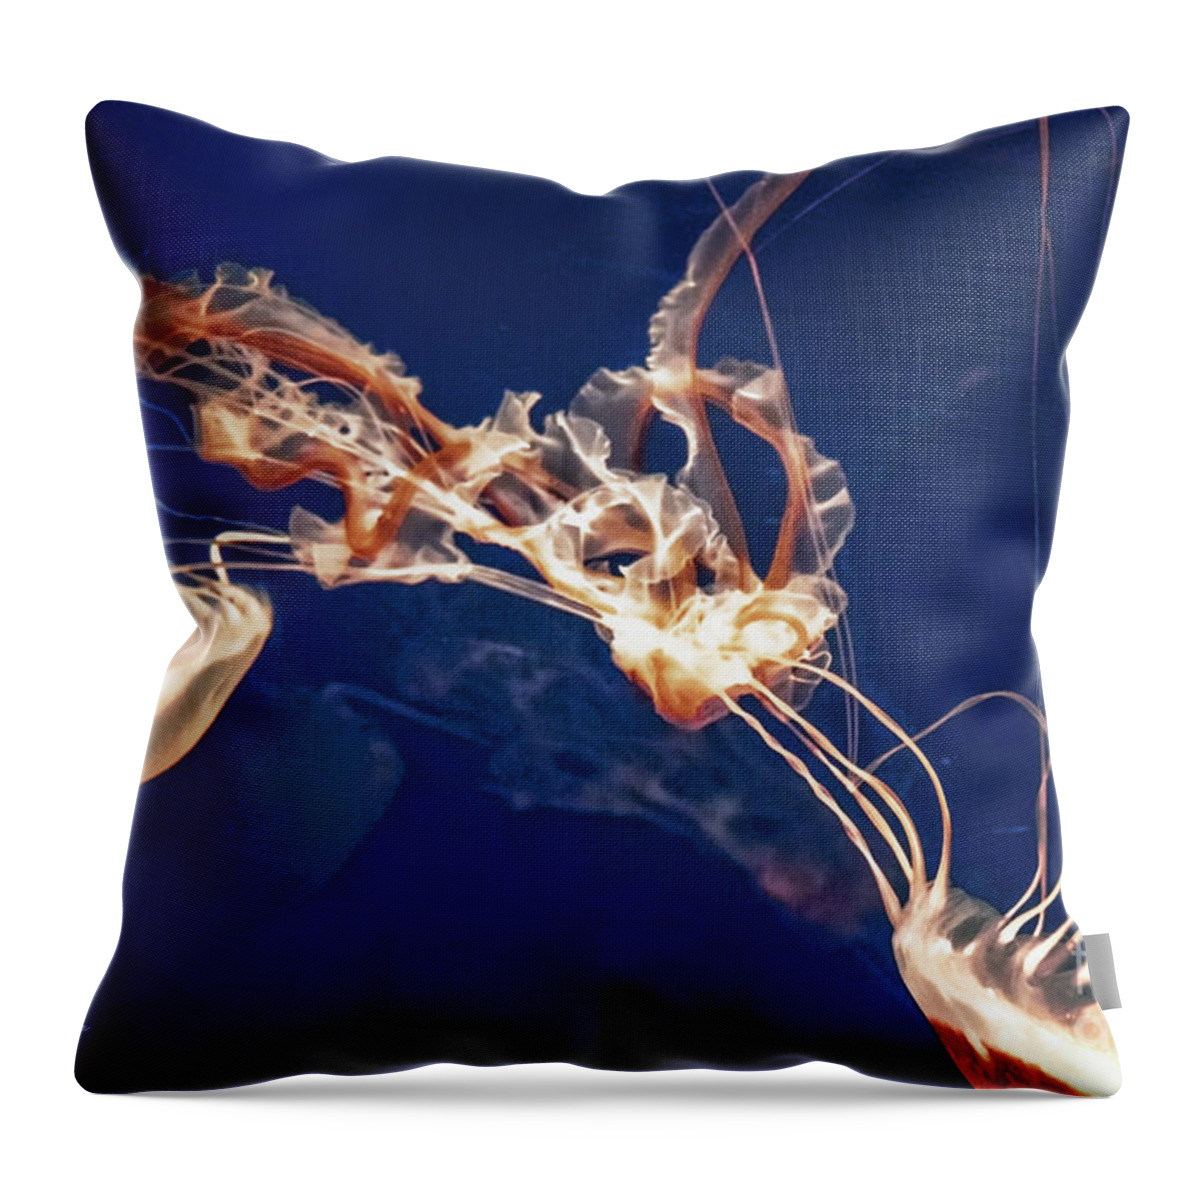 Jelly Fish Throw Pillow featuring the digital art Jelly Fish Web by Georgianne Giese